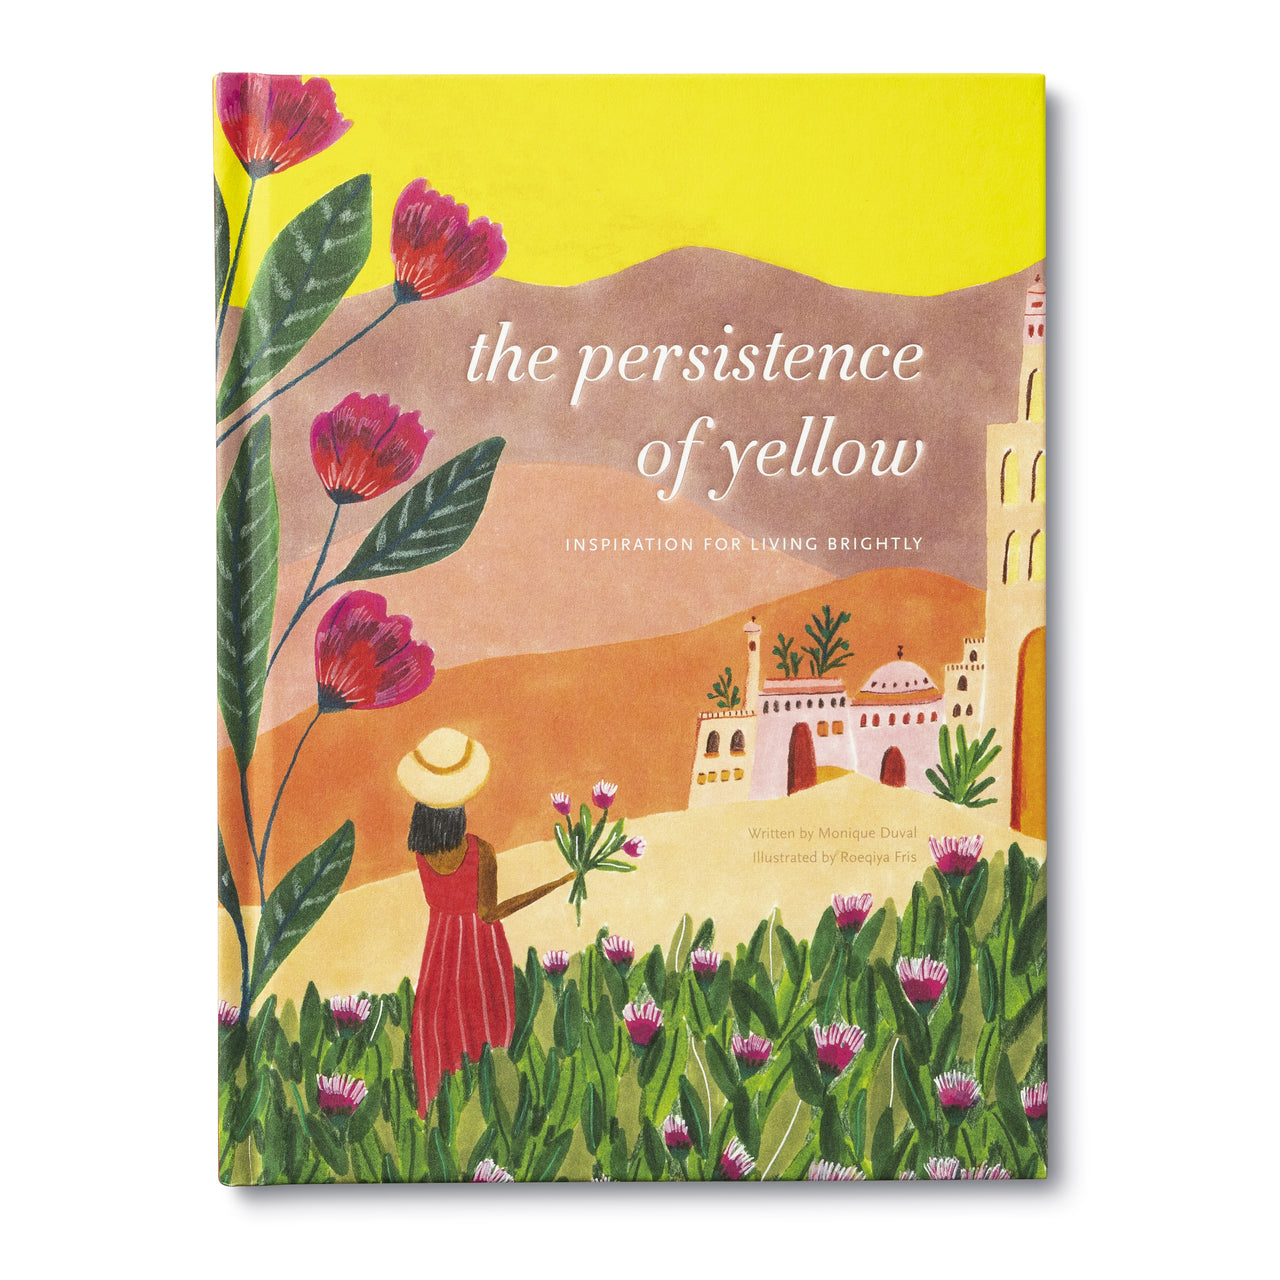 The Persistence of Yellow book